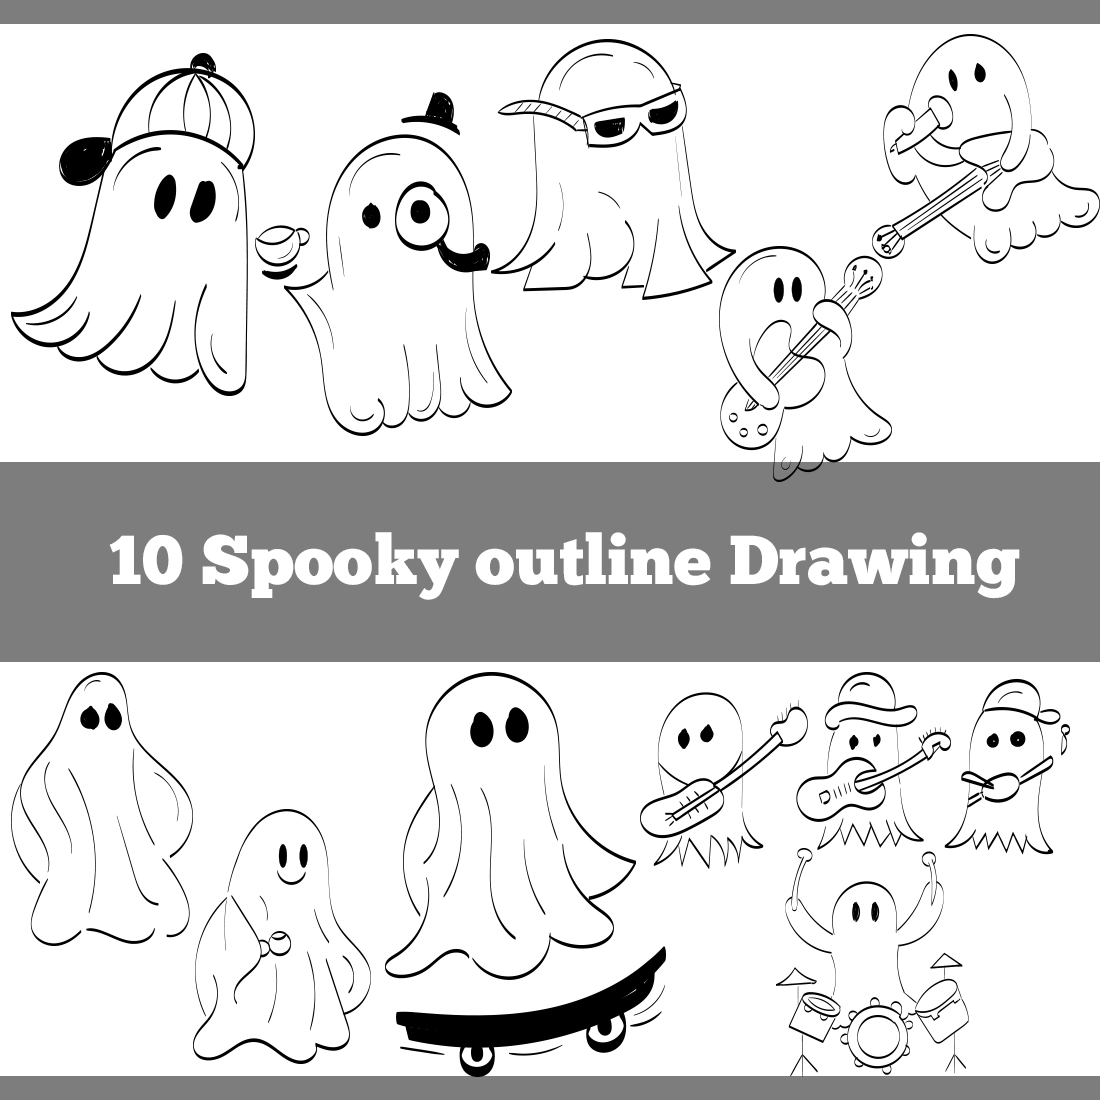 Spooky Ghost Outline Drawing cover image.